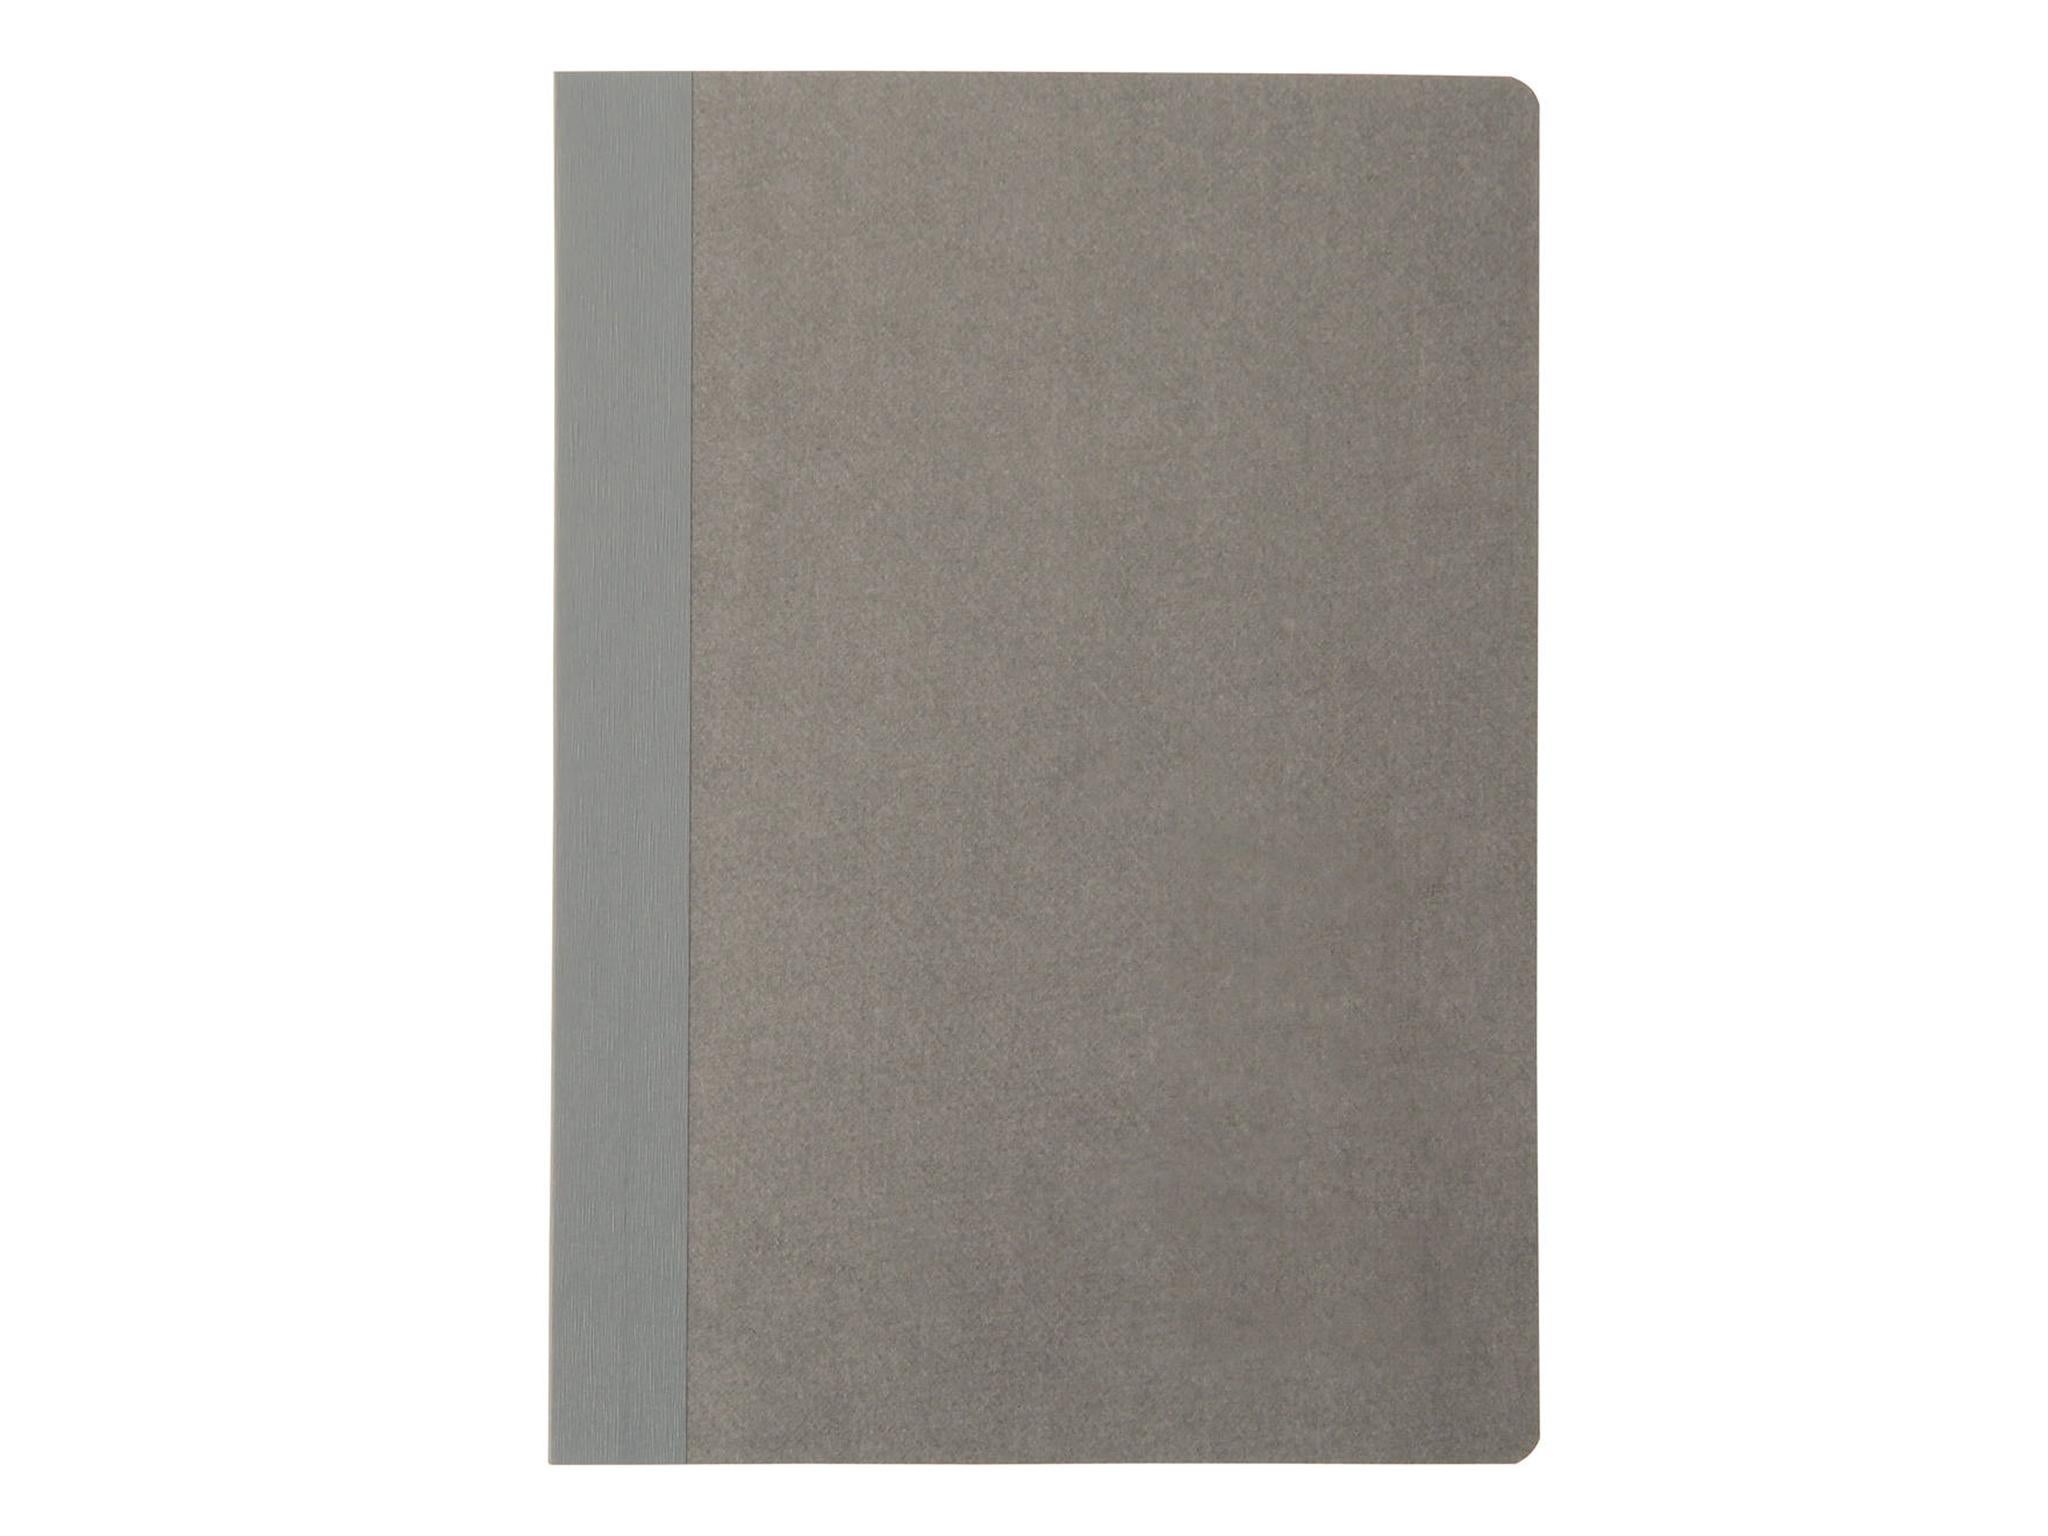 Affordable and smartly designed, this notebook is ideal for packing in a school bag